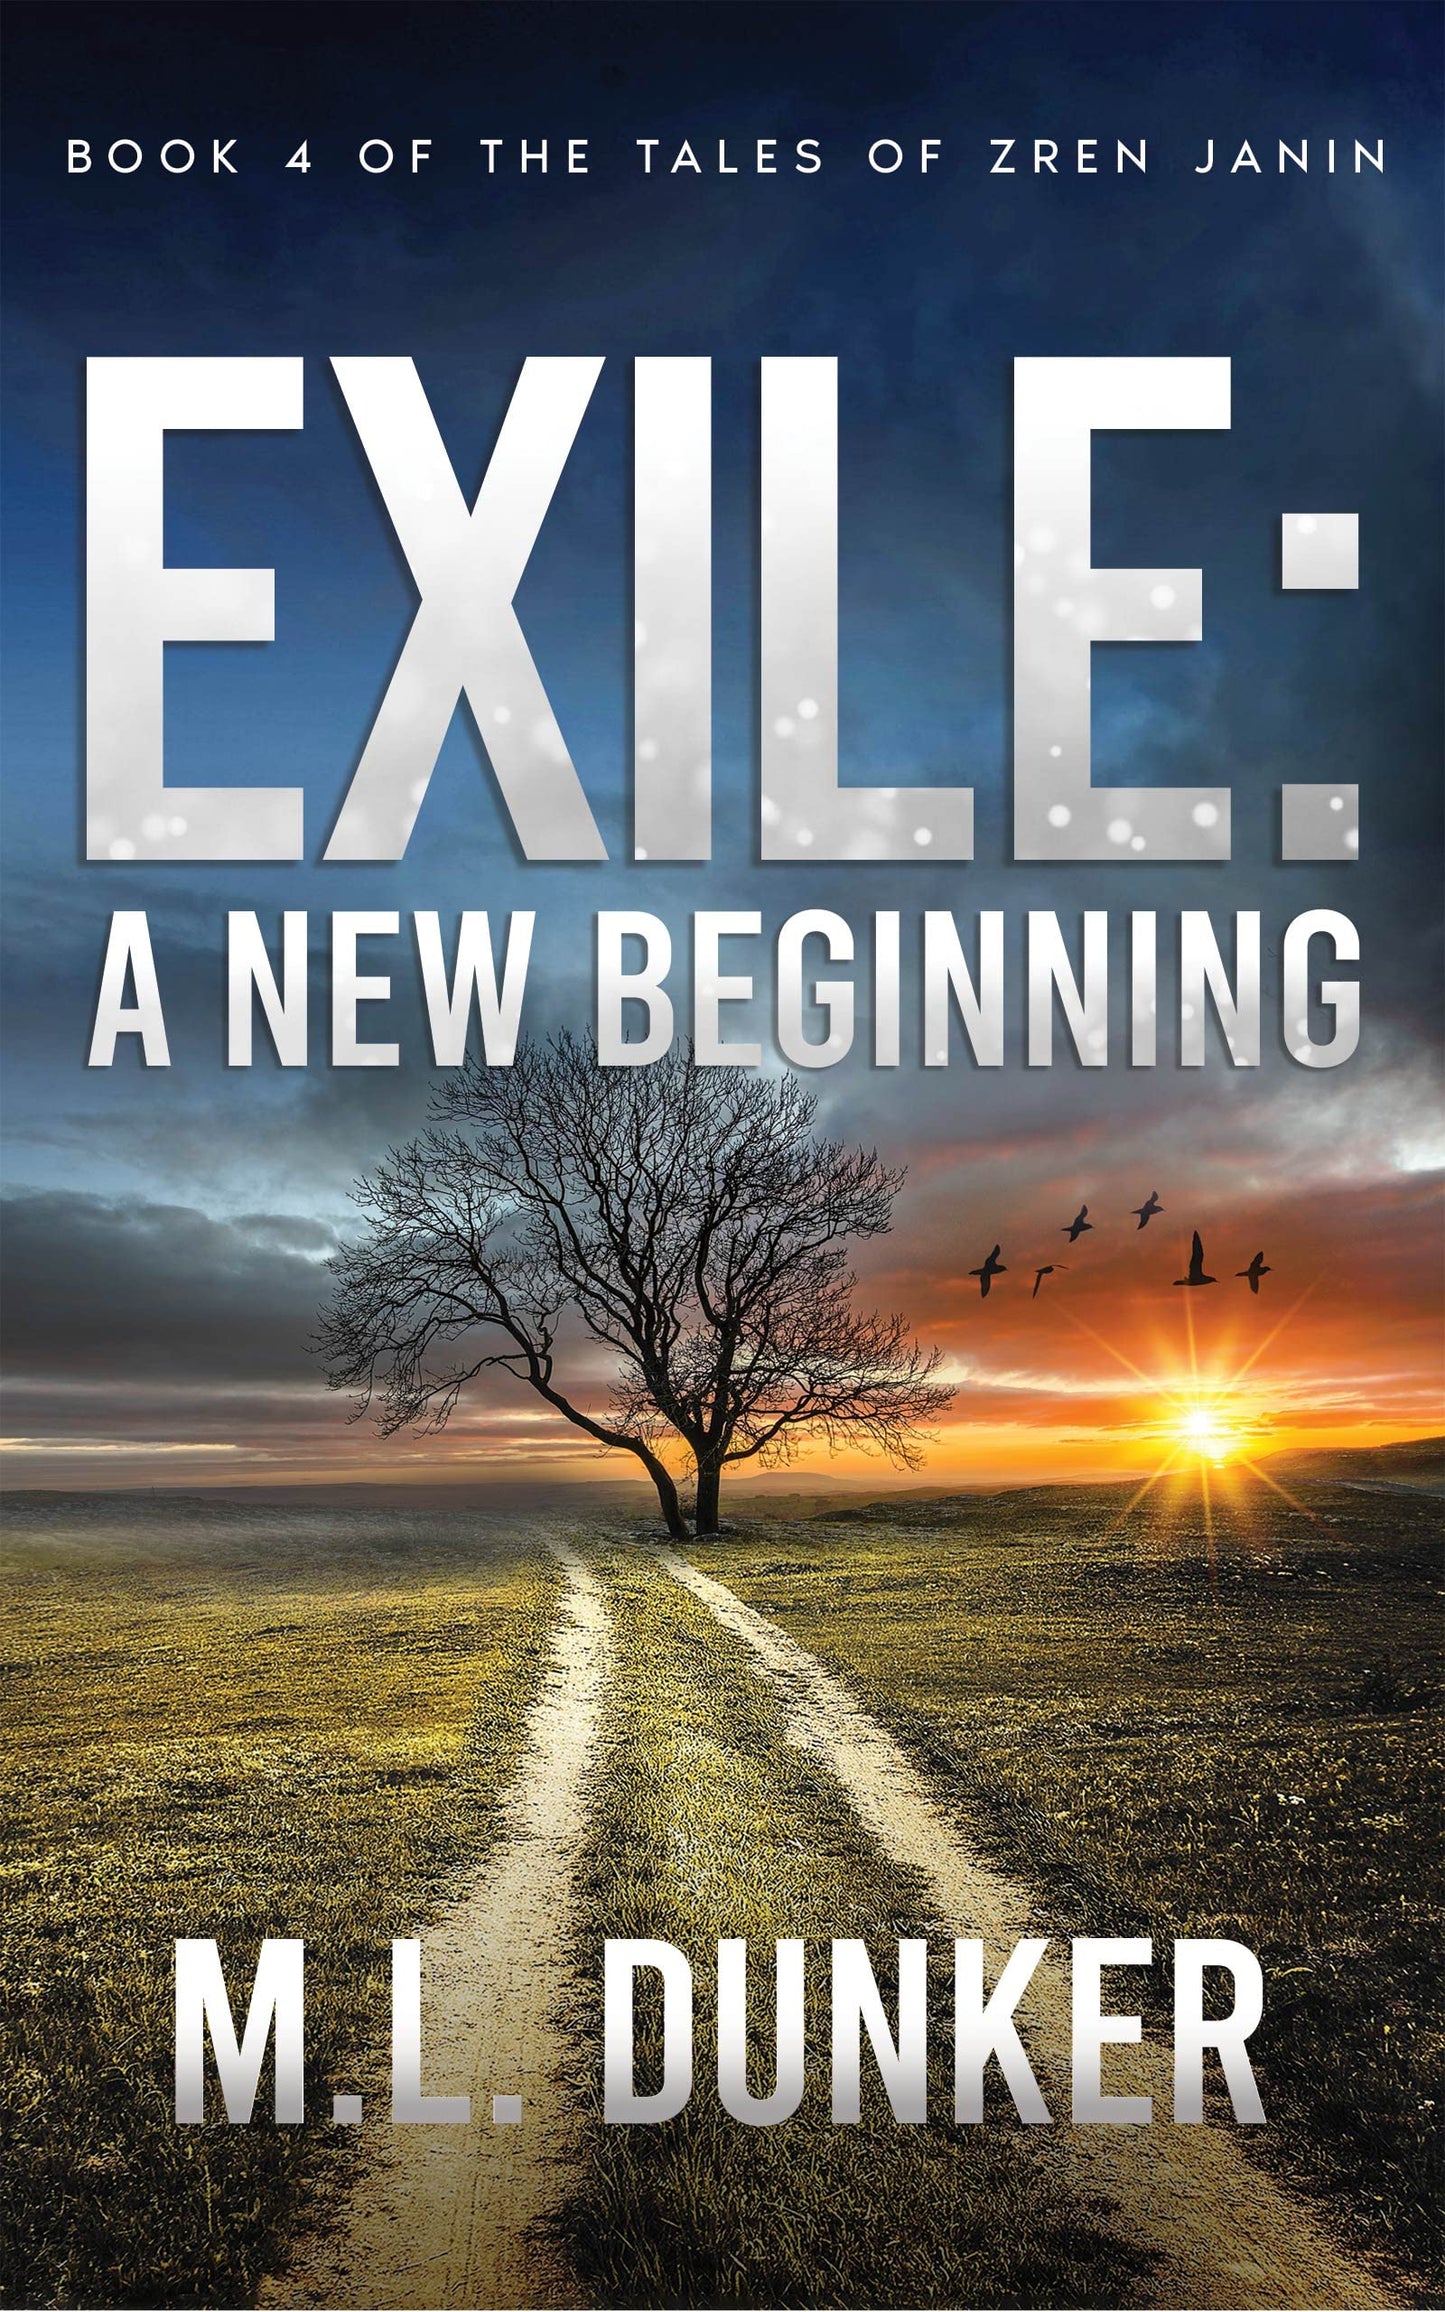 Exile: A New Beginning: Book 4 of The Tales of Zren Janin